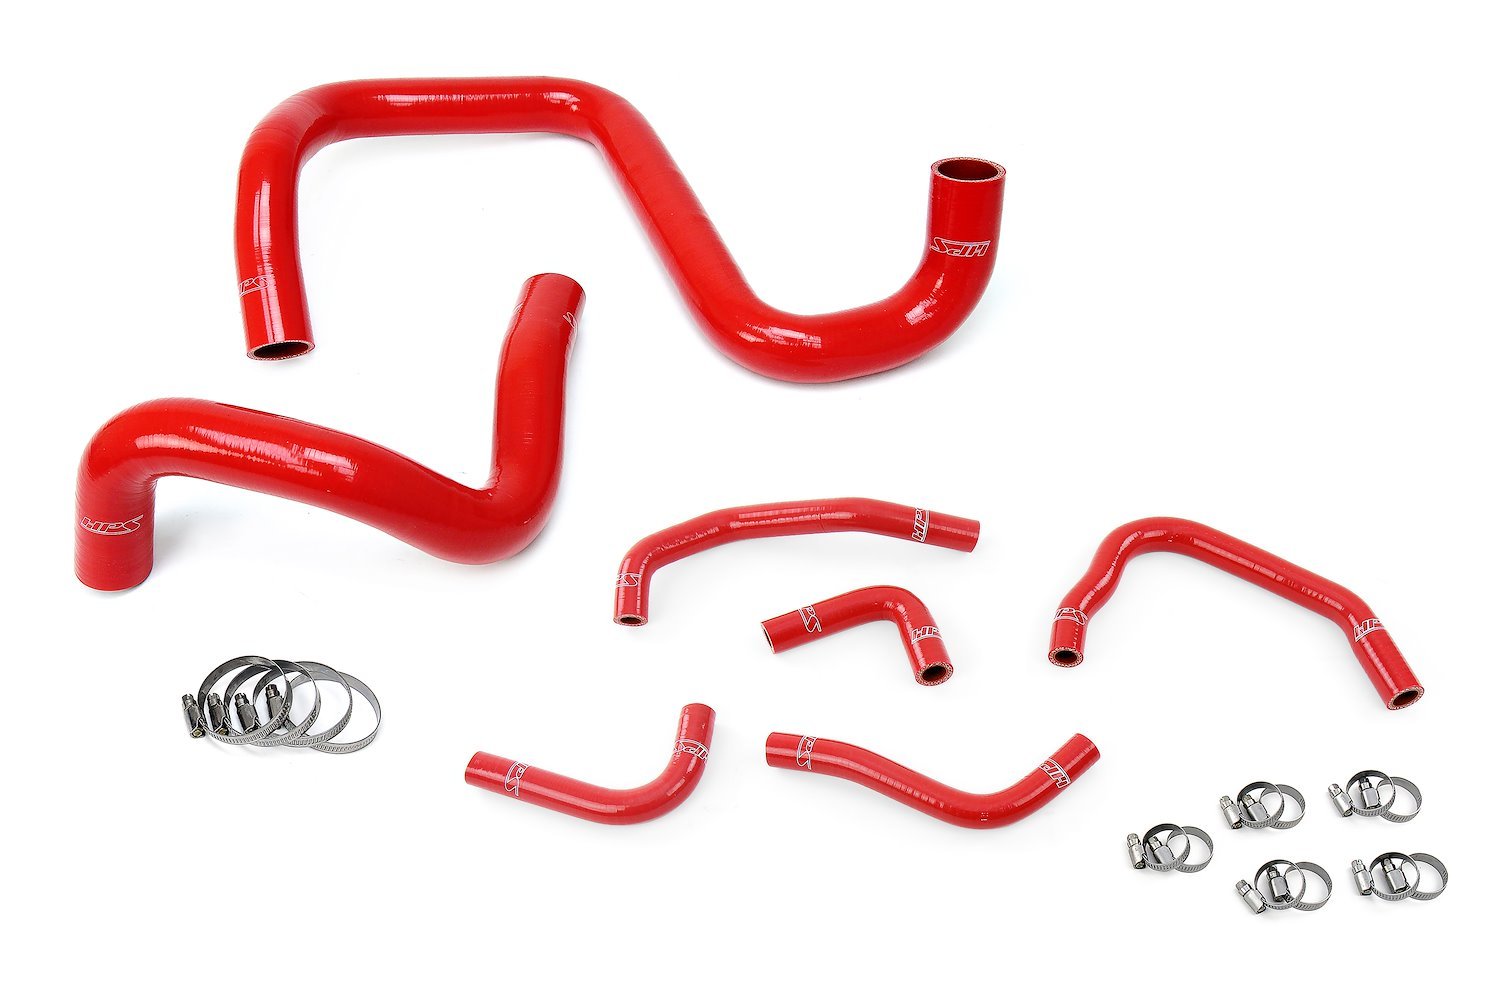 57-1285-RED Coolant Hose Kit, High-Temp 3-Ply Reinforced Silicone, Replace Rubber Radiator Heater Coolant Hoses